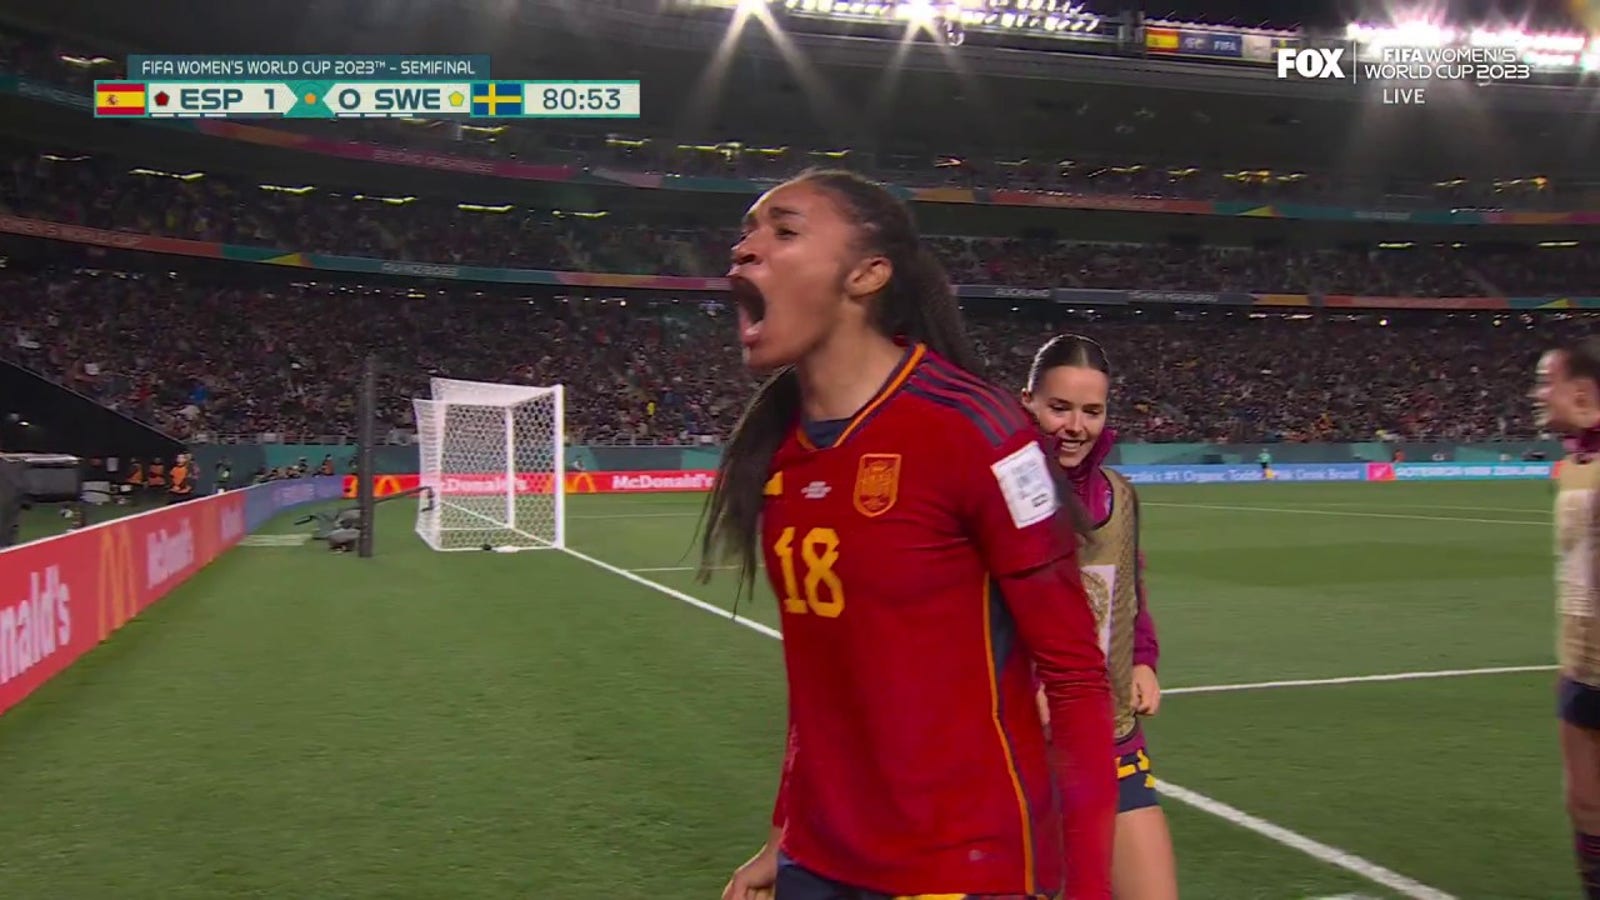 Spain's Salma Paralluelo scores against Sweden in 81st minute